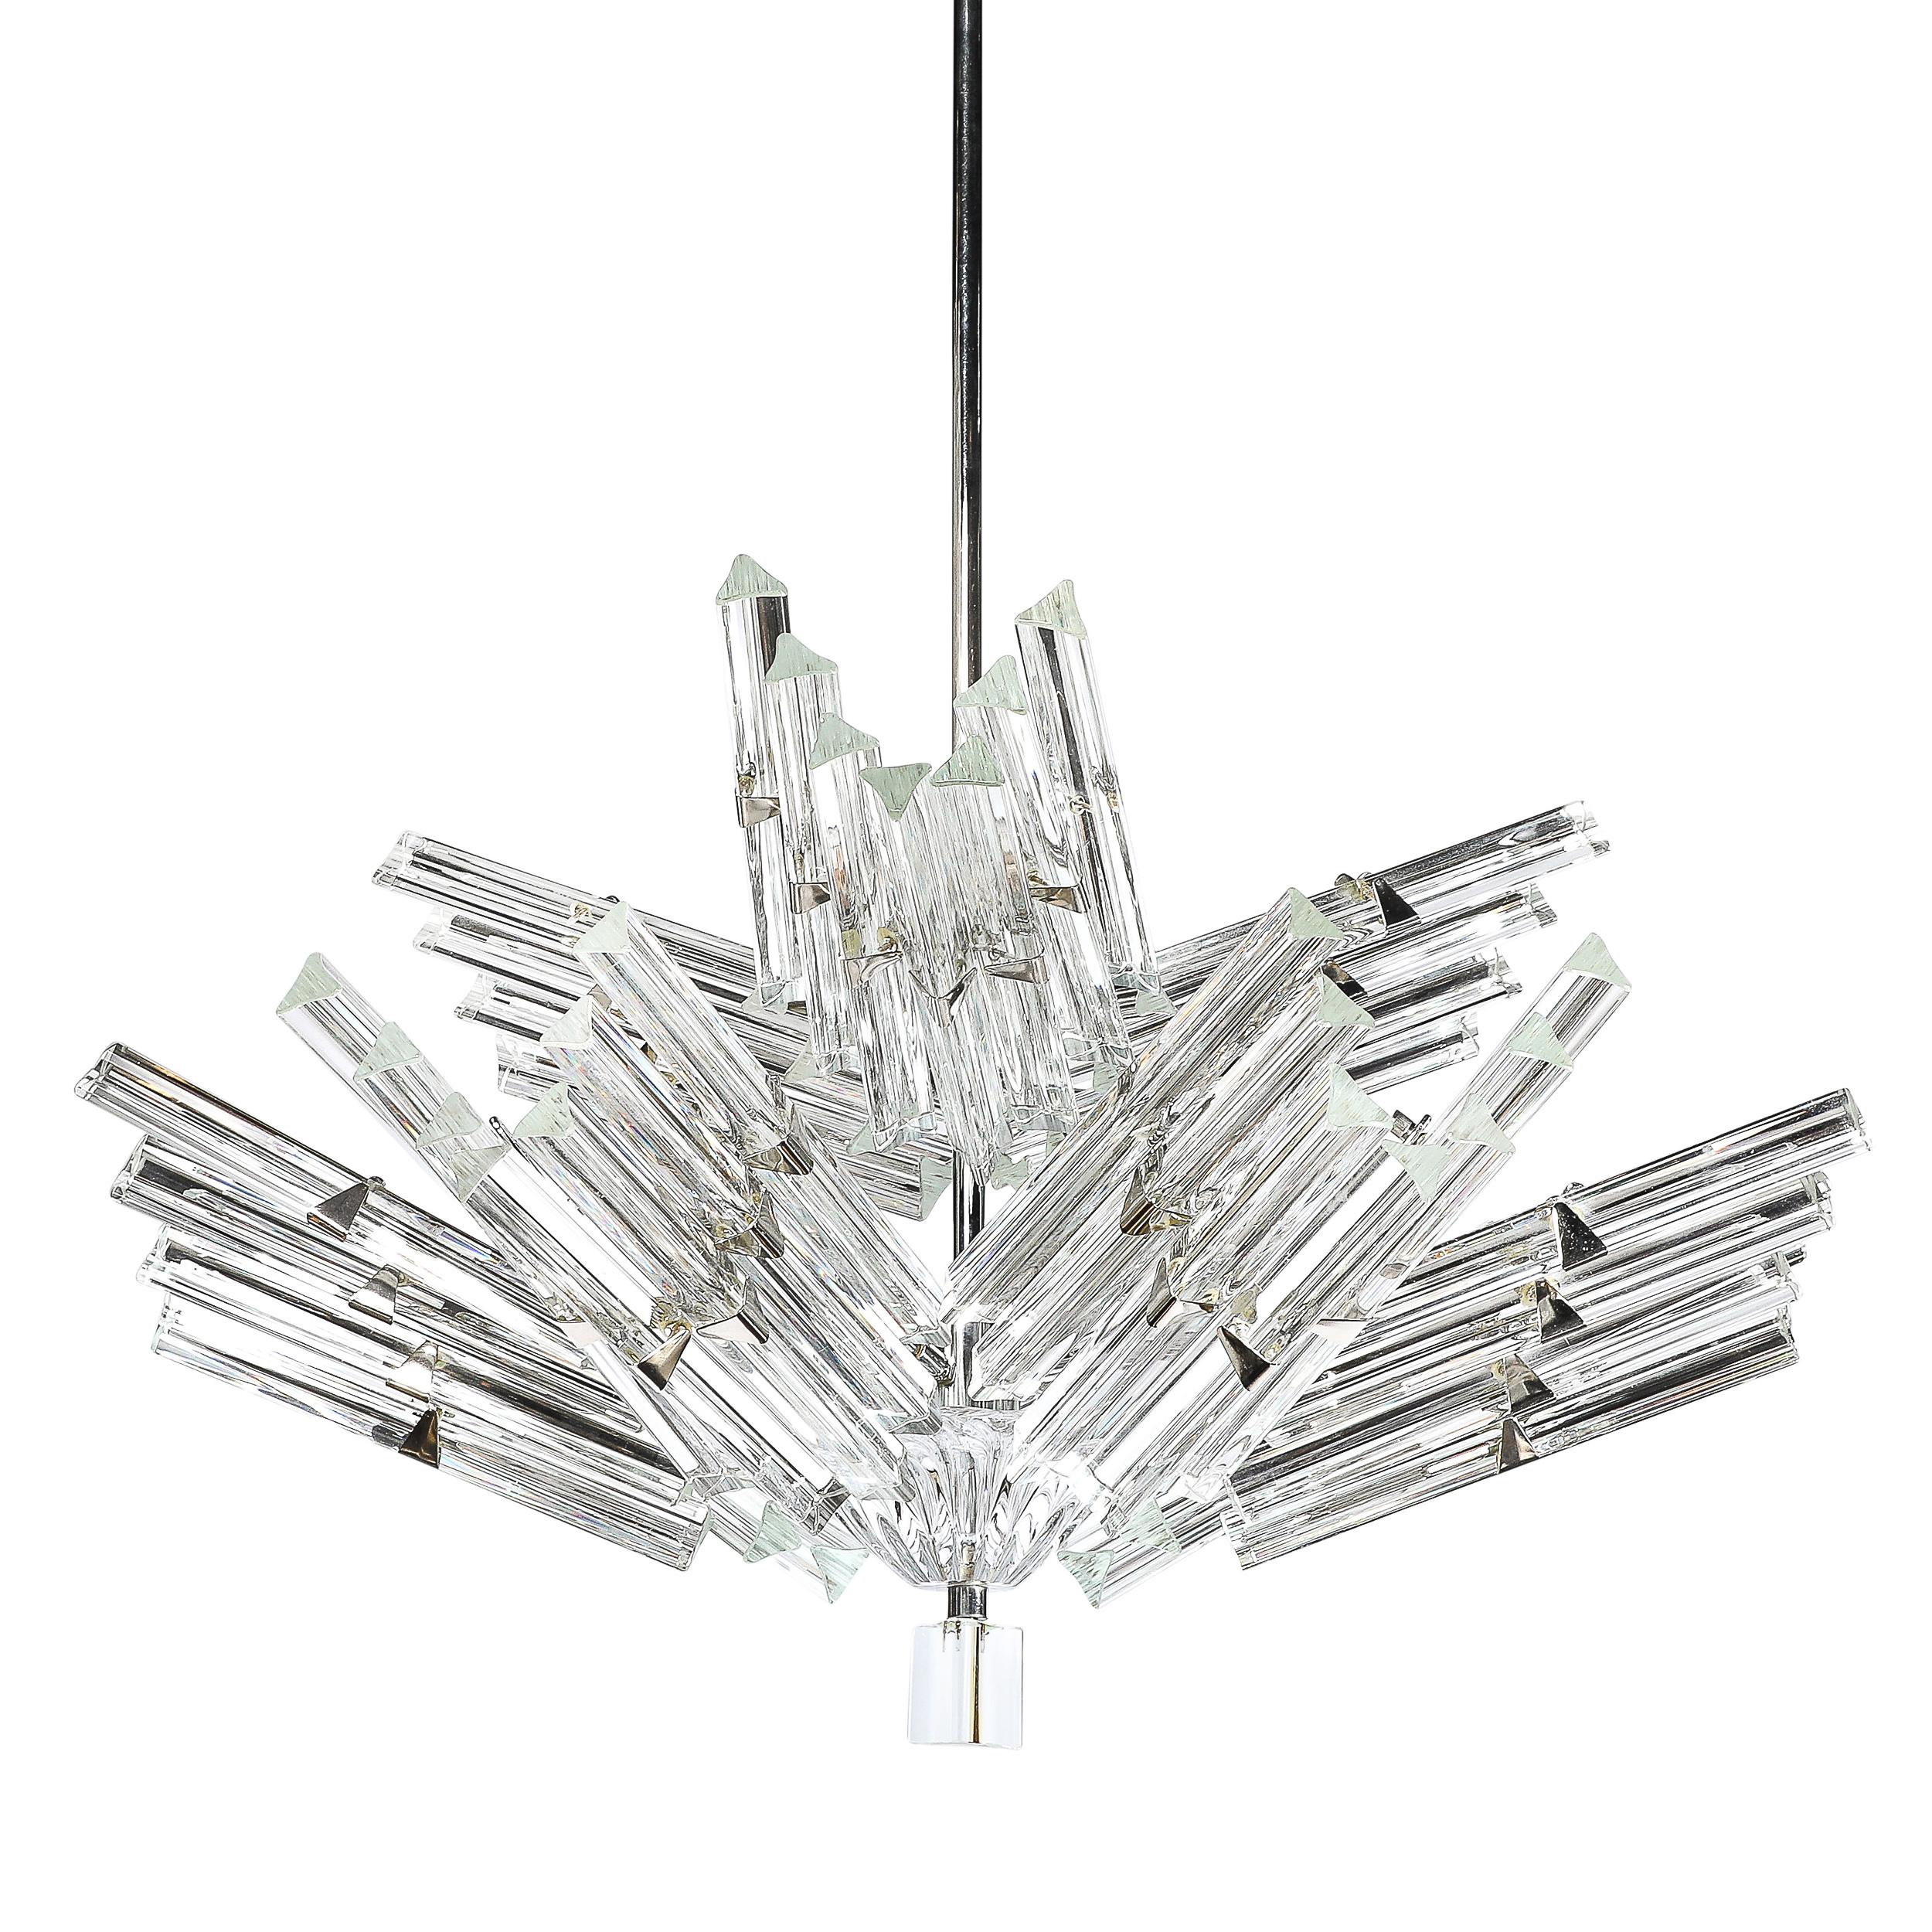 This uniquely bold and elegant Mid-Century Modernist Hand-Blown Murano Stepped Cluster Triedre Chandelier with chrome Fittings originates from Italy, Circa 1970. Features a highly geometric and expansive form composed of stepped clusters of